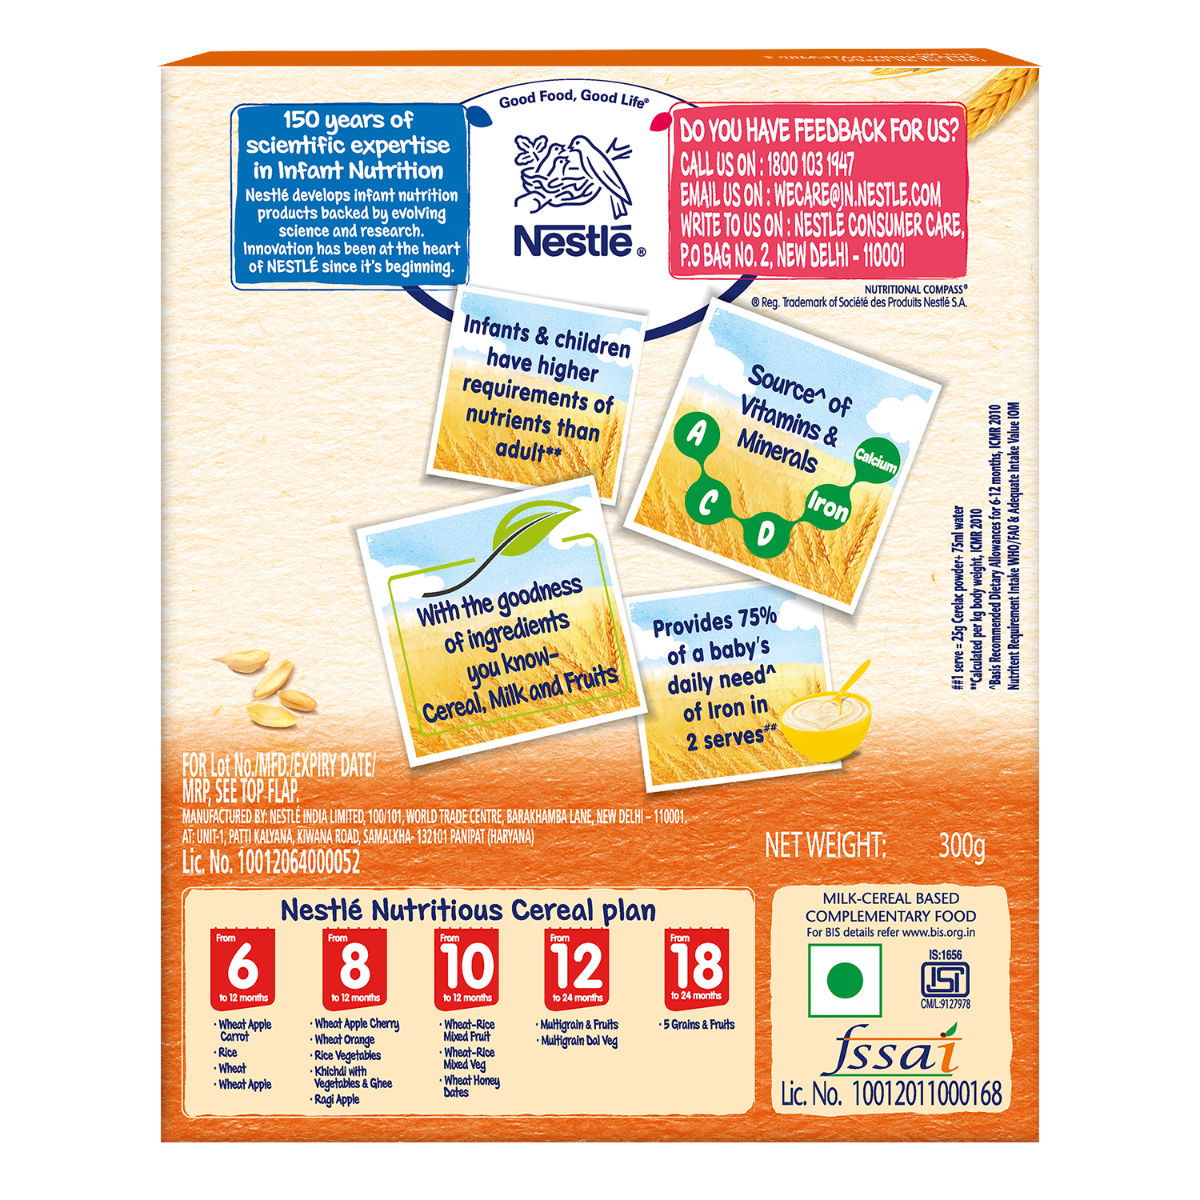 Nestle Cerelac Wheat Orange Baby Cereal, 8 to 12 Months, 300 gm Refill Pack, Pack of 1 